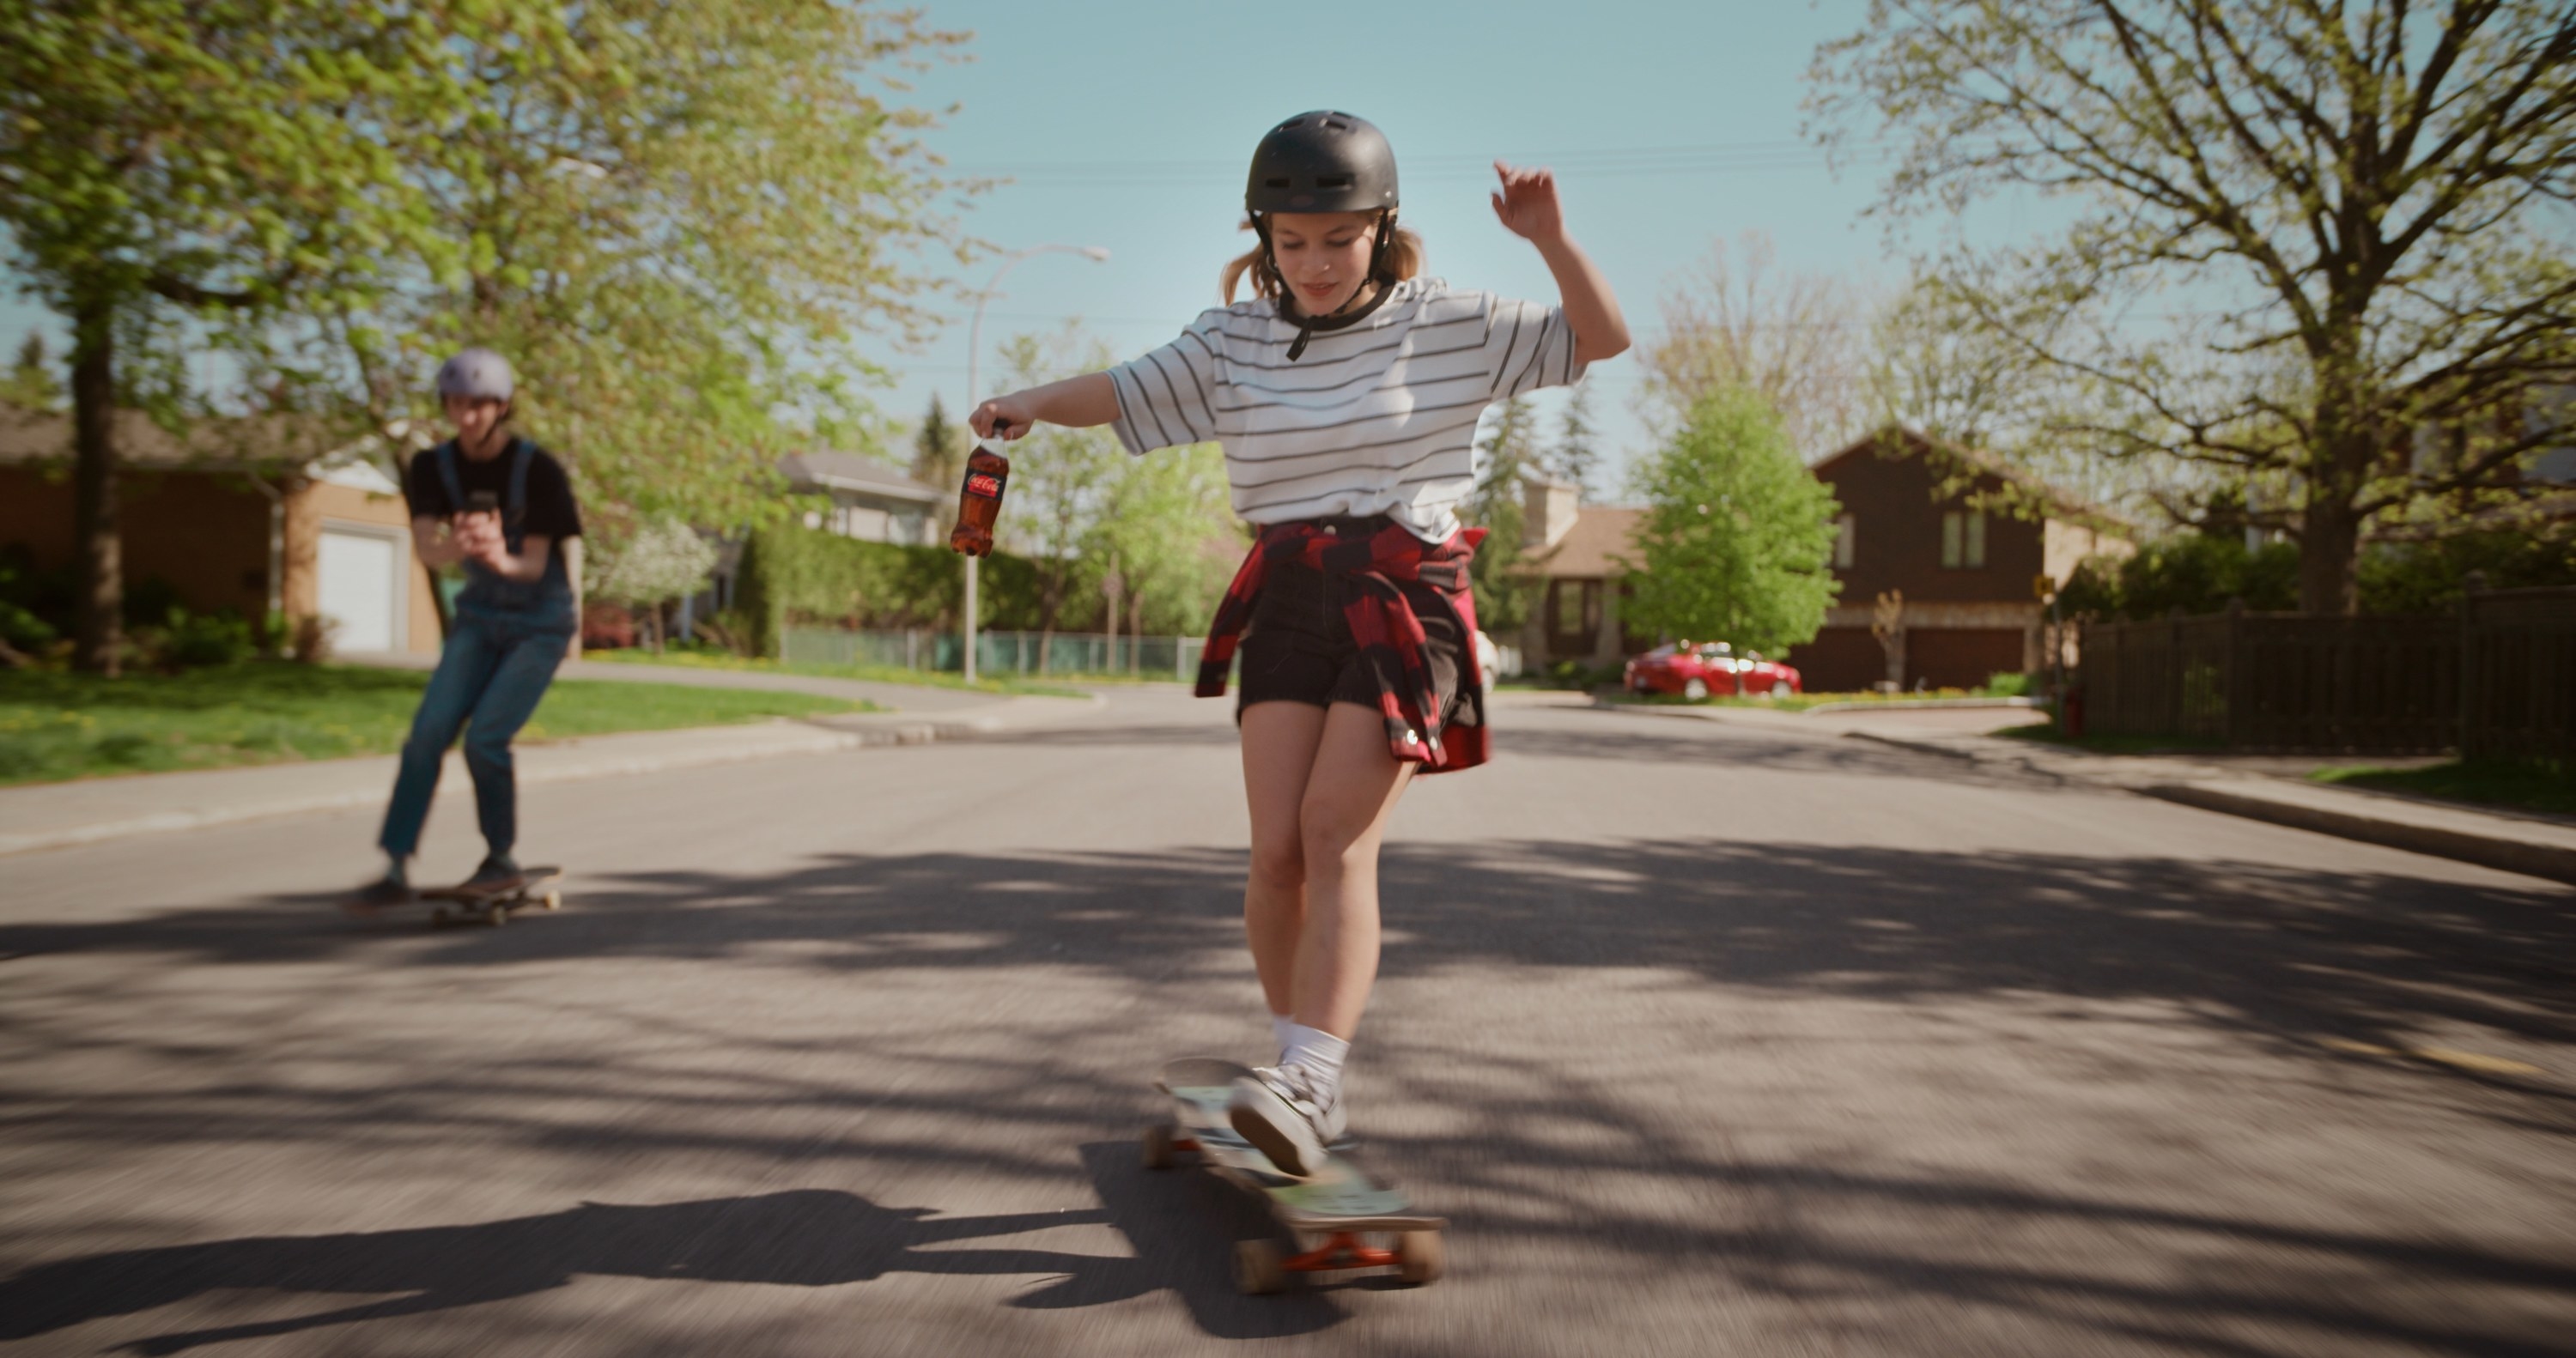 A person skate boarding while holding a Coca Cola mini bottle; their friend is filming on a smartphone